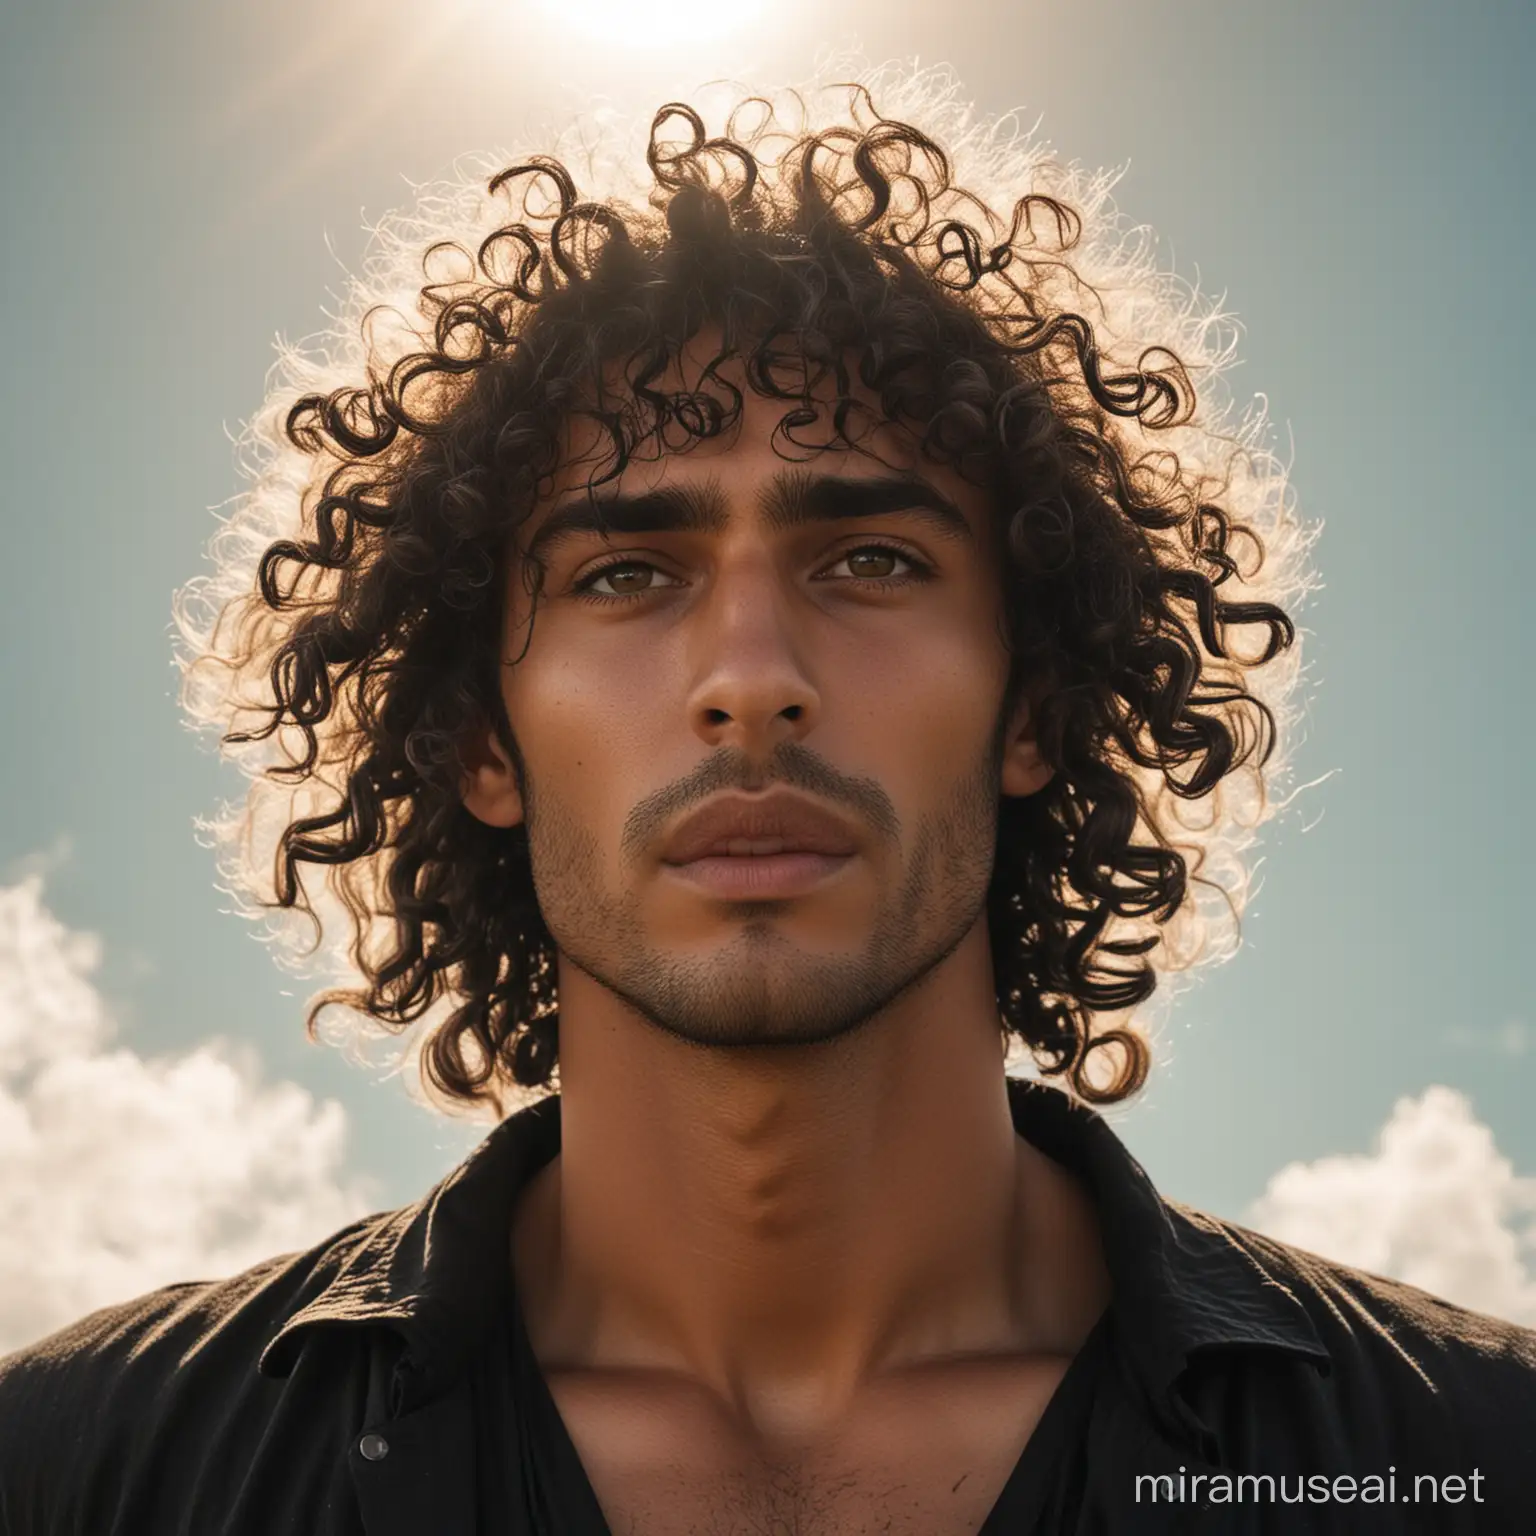 Intense Gothic Man with Curly Hair Embracing Sunlight